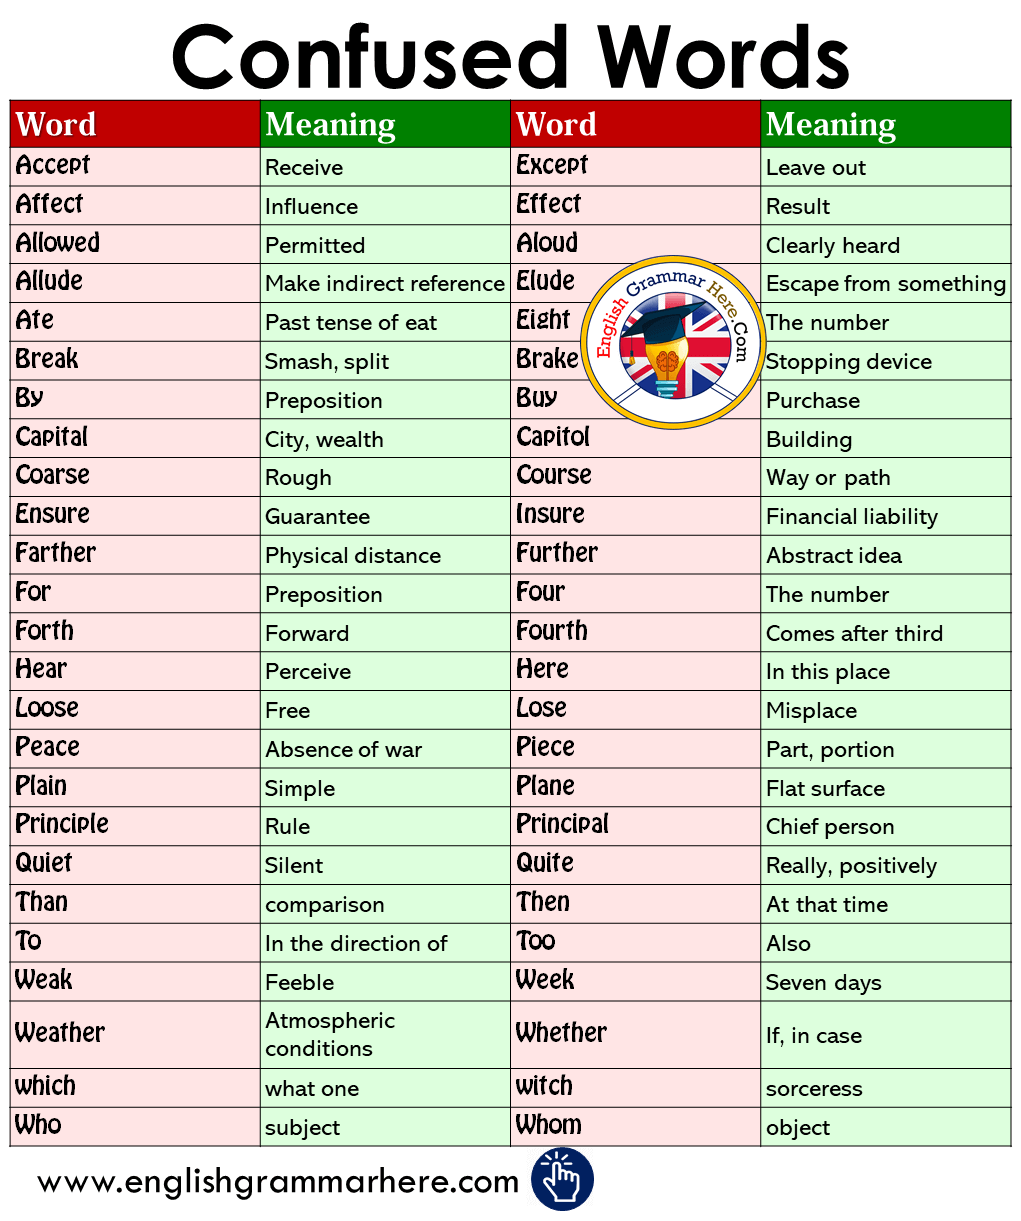 Commonly Confused Words in English - English Grammar Here